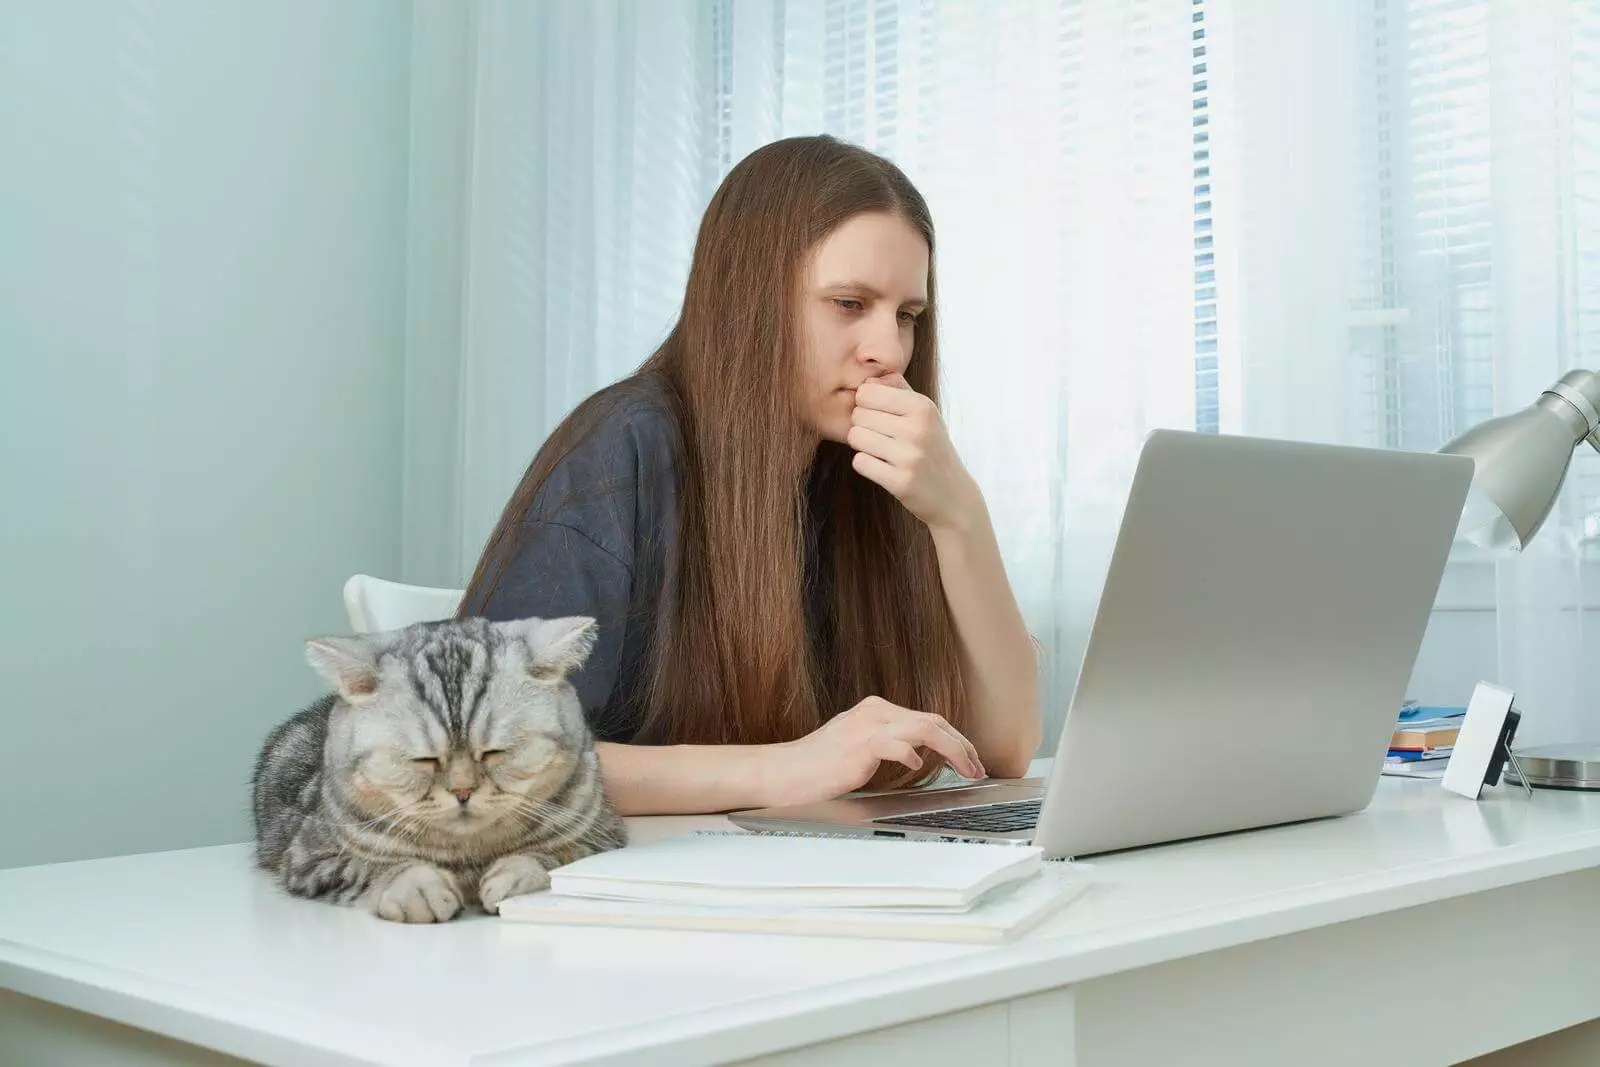 A Woman Multitasking At A Desk, Learning To Be A Copywriter While Her Cat Keeps Her Company.